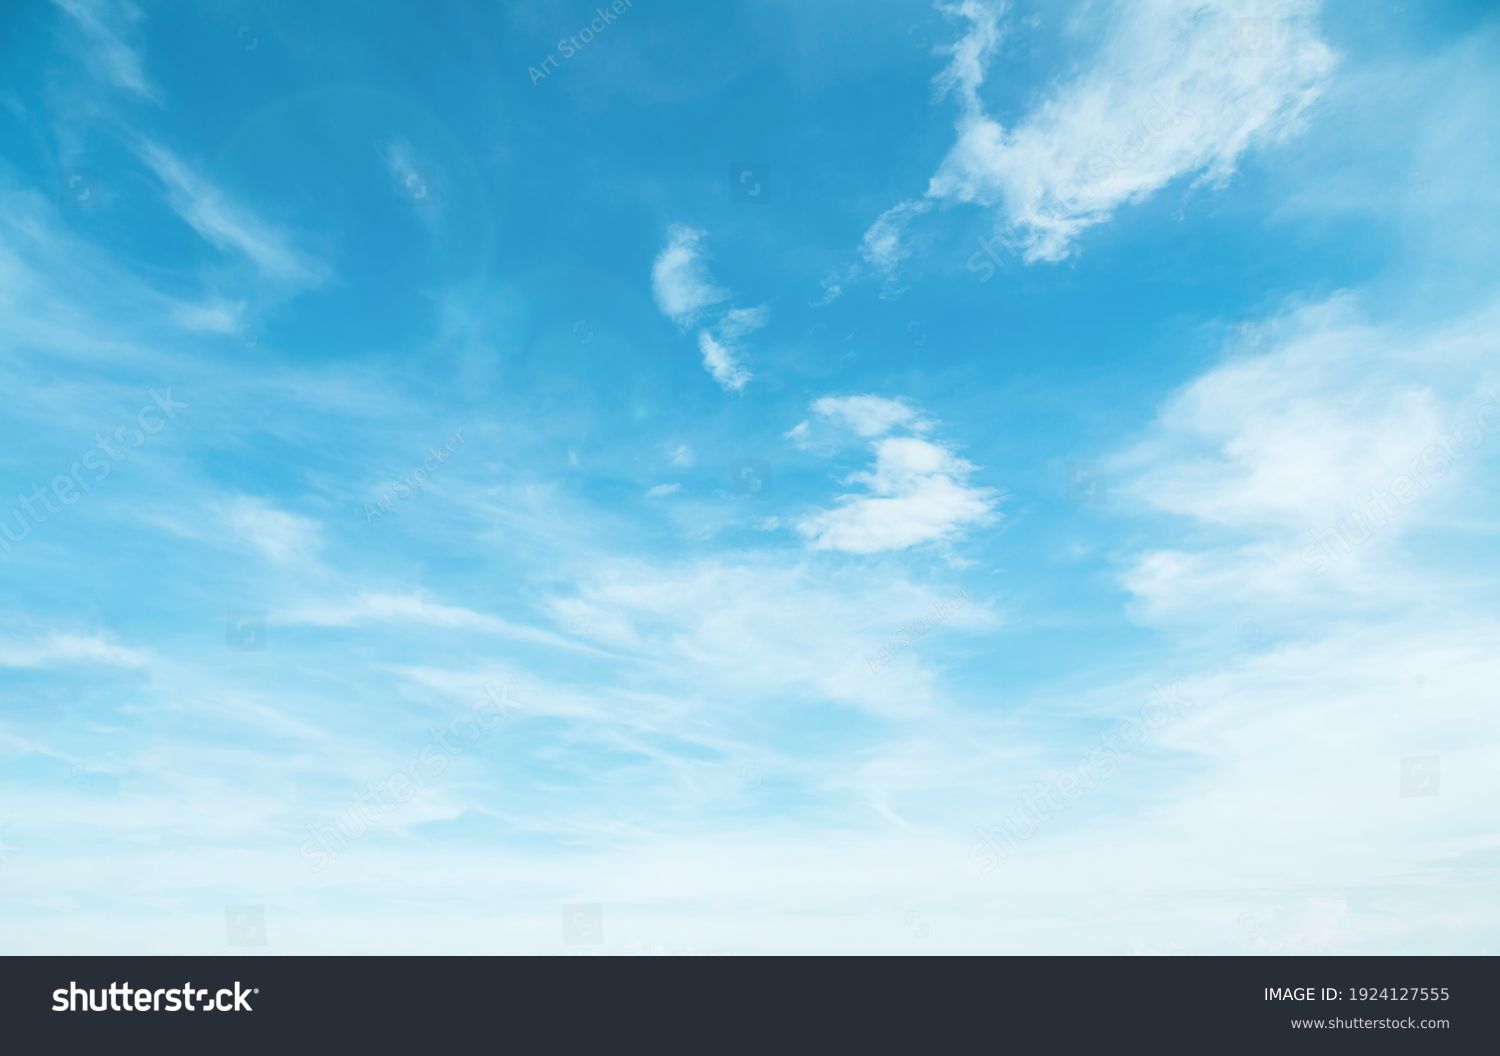 Summer blue sky cloud gradient light white background. Beauty clear cloudy in sunshine calm bright winter air bacground. Gloomy vivid cyan landscape in environment day horizon skyline view spring wind #1924127555